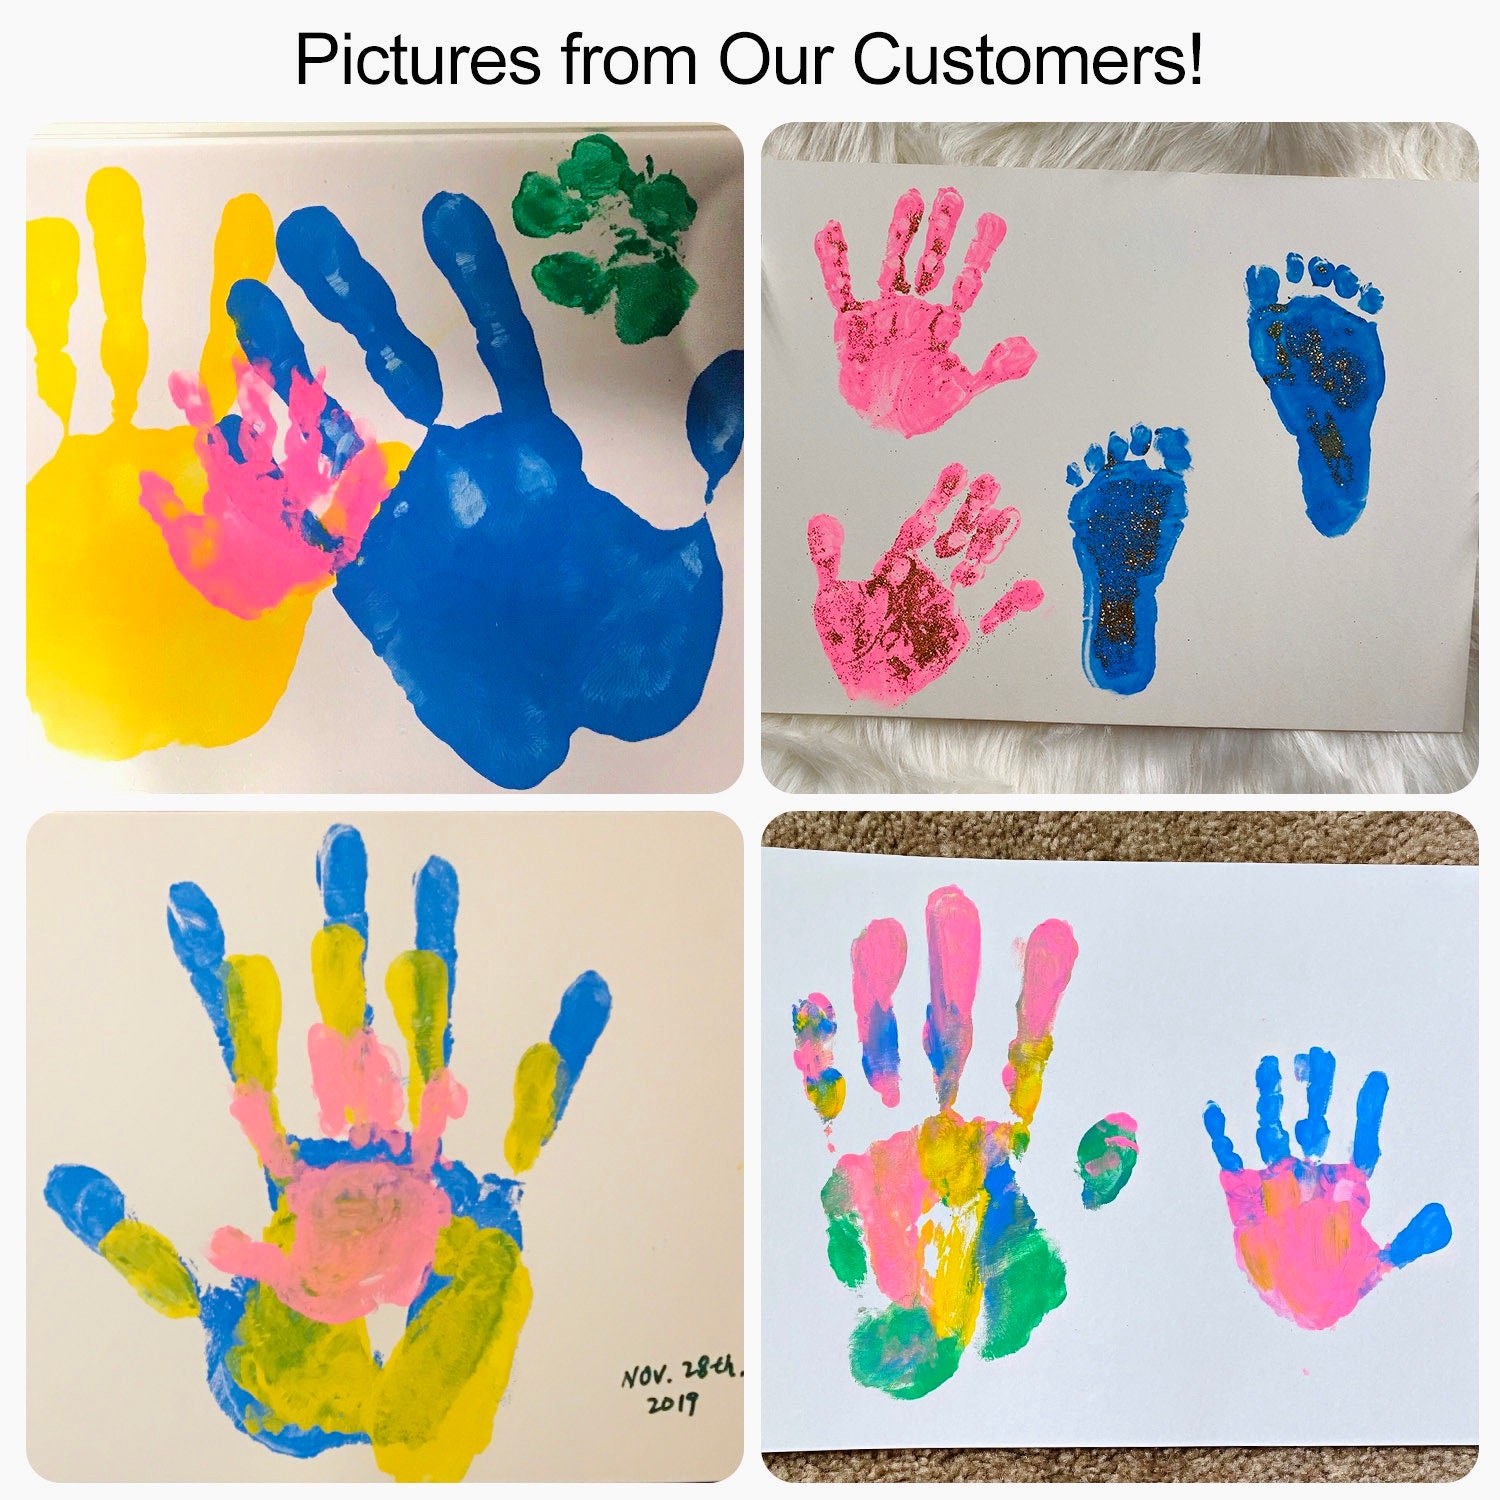 Personalized Family Handprint Kit, Paint Craft DIY Baby Keepsake Frame,  Non-toxic Paints With Large Size Family Photo Frame 